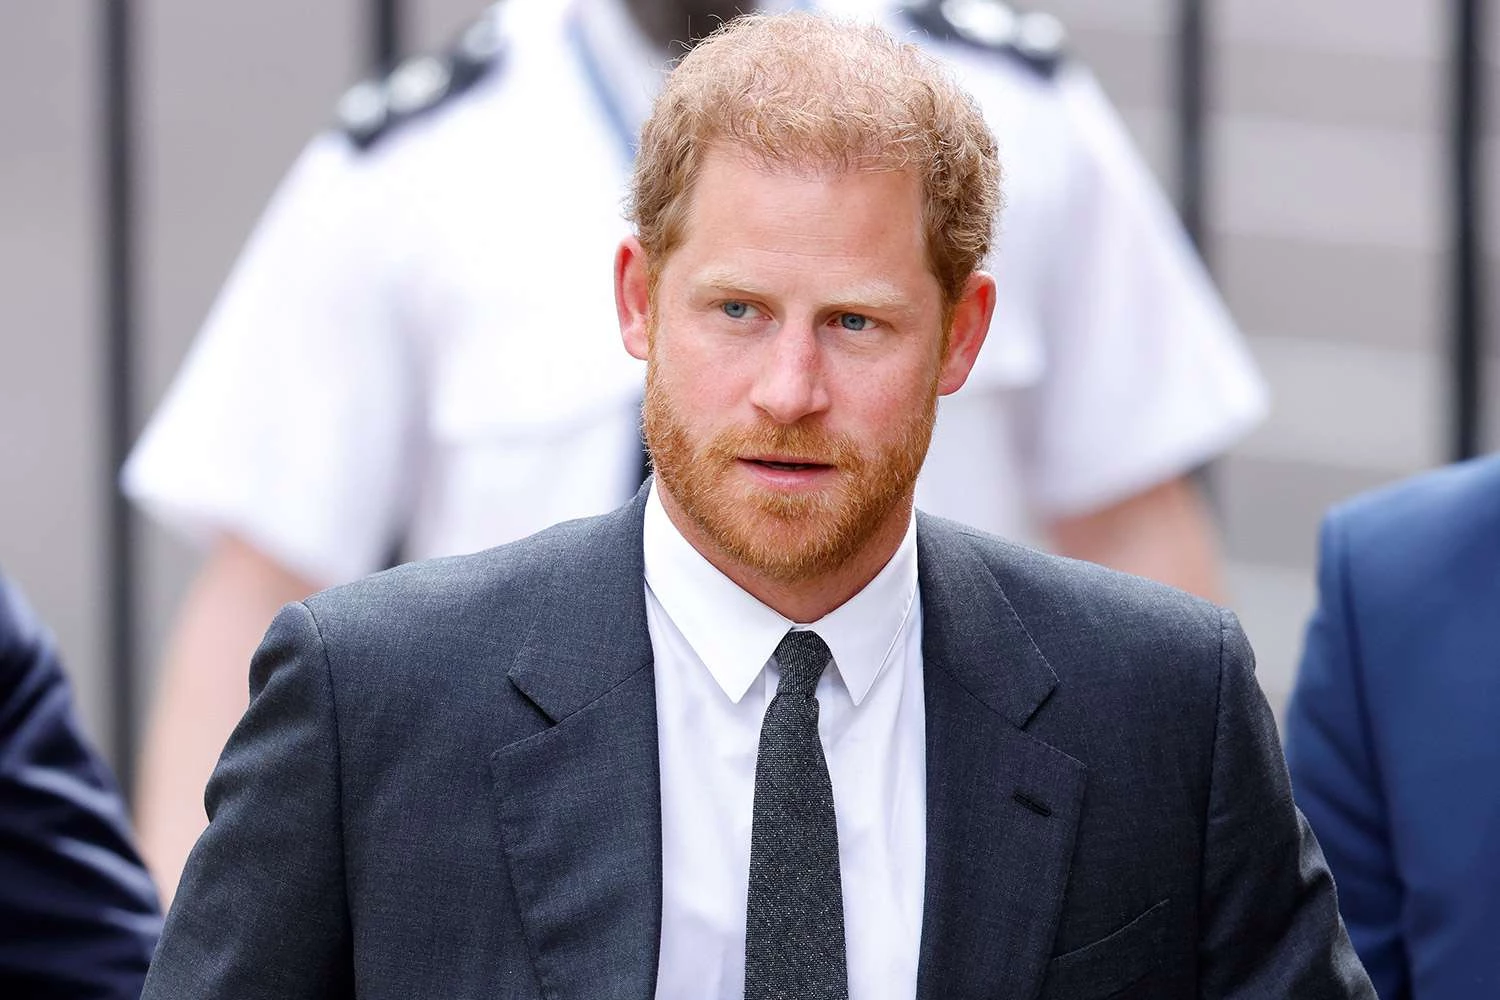 Prince Harry’s Brothers Call Him “Harold”, Though “Henry” Is His Real Name